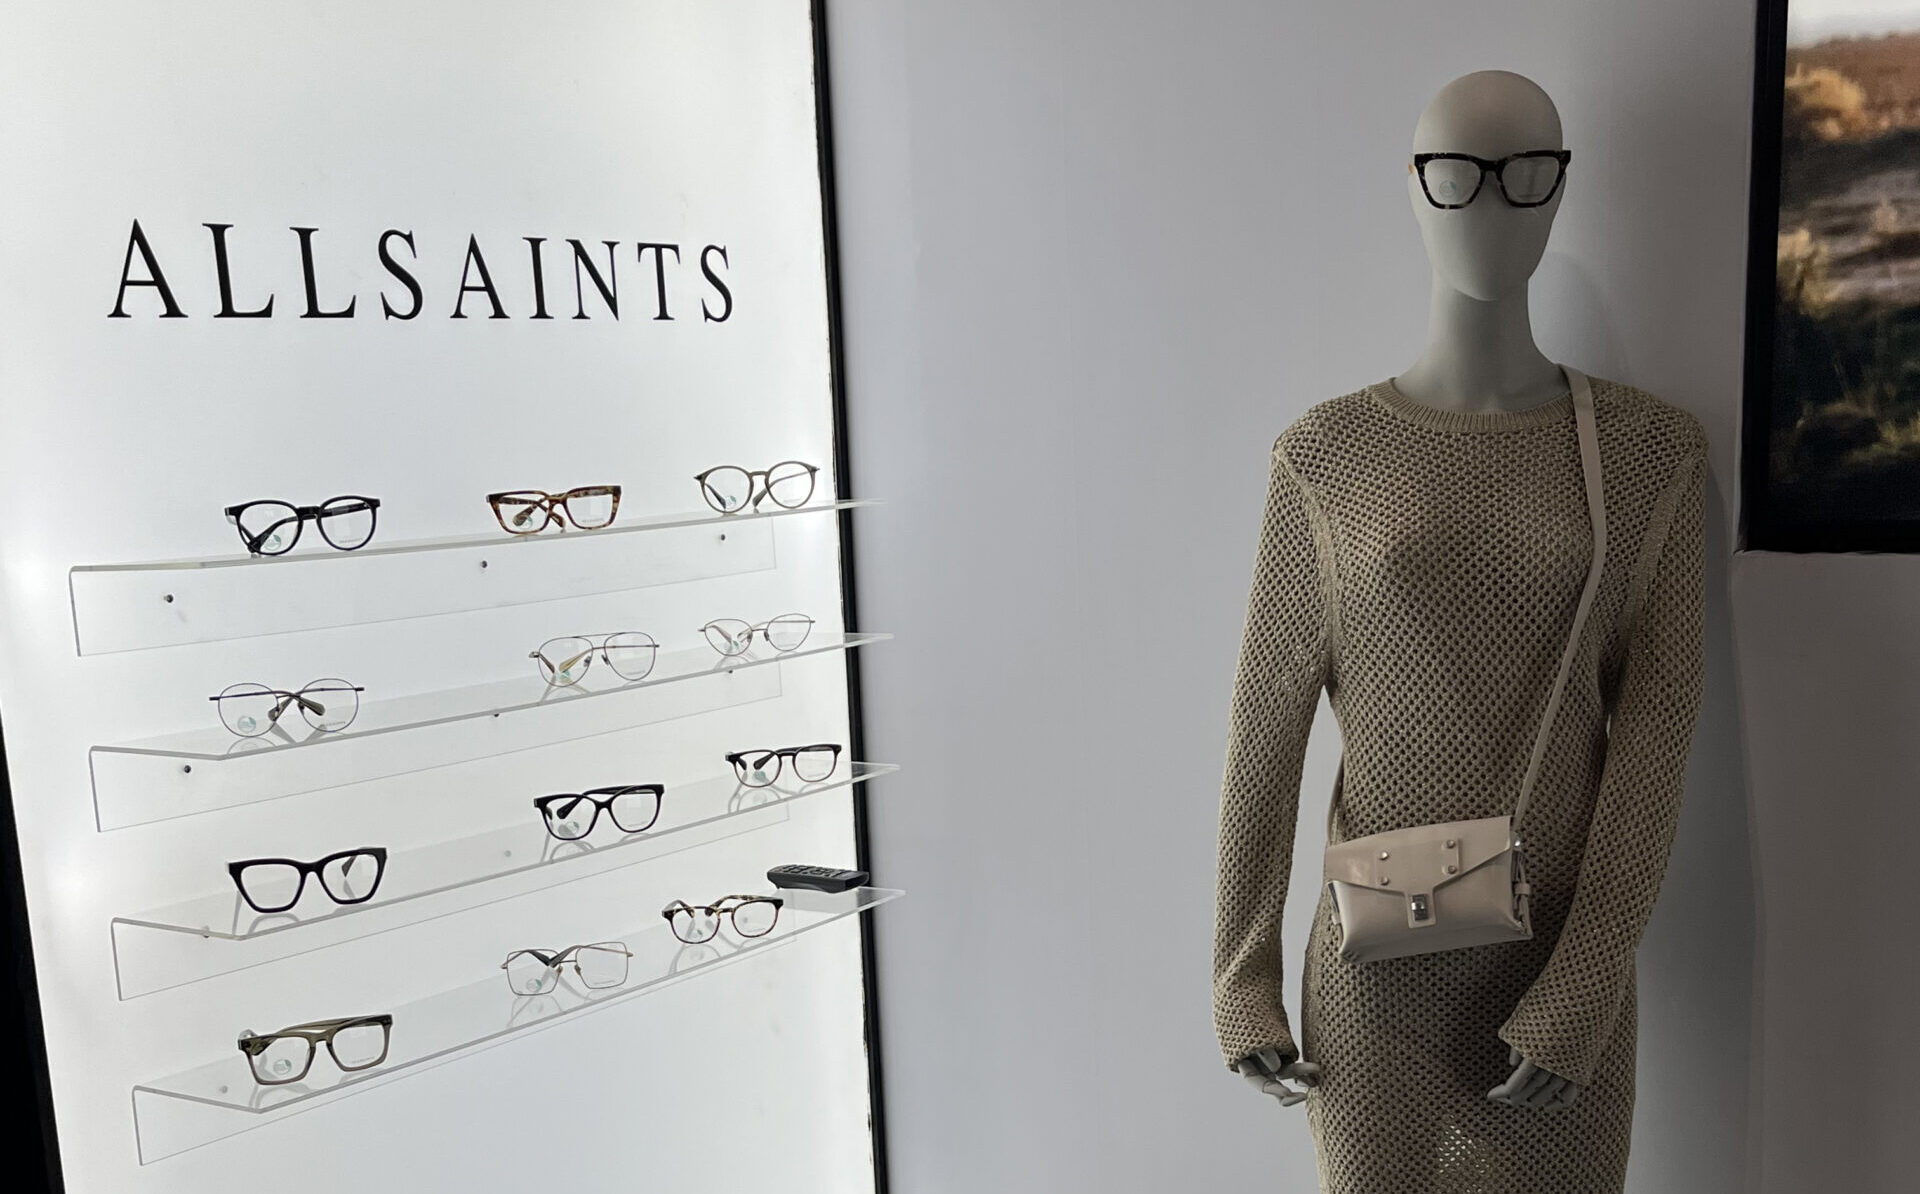 AllSaints stand at !00% optical